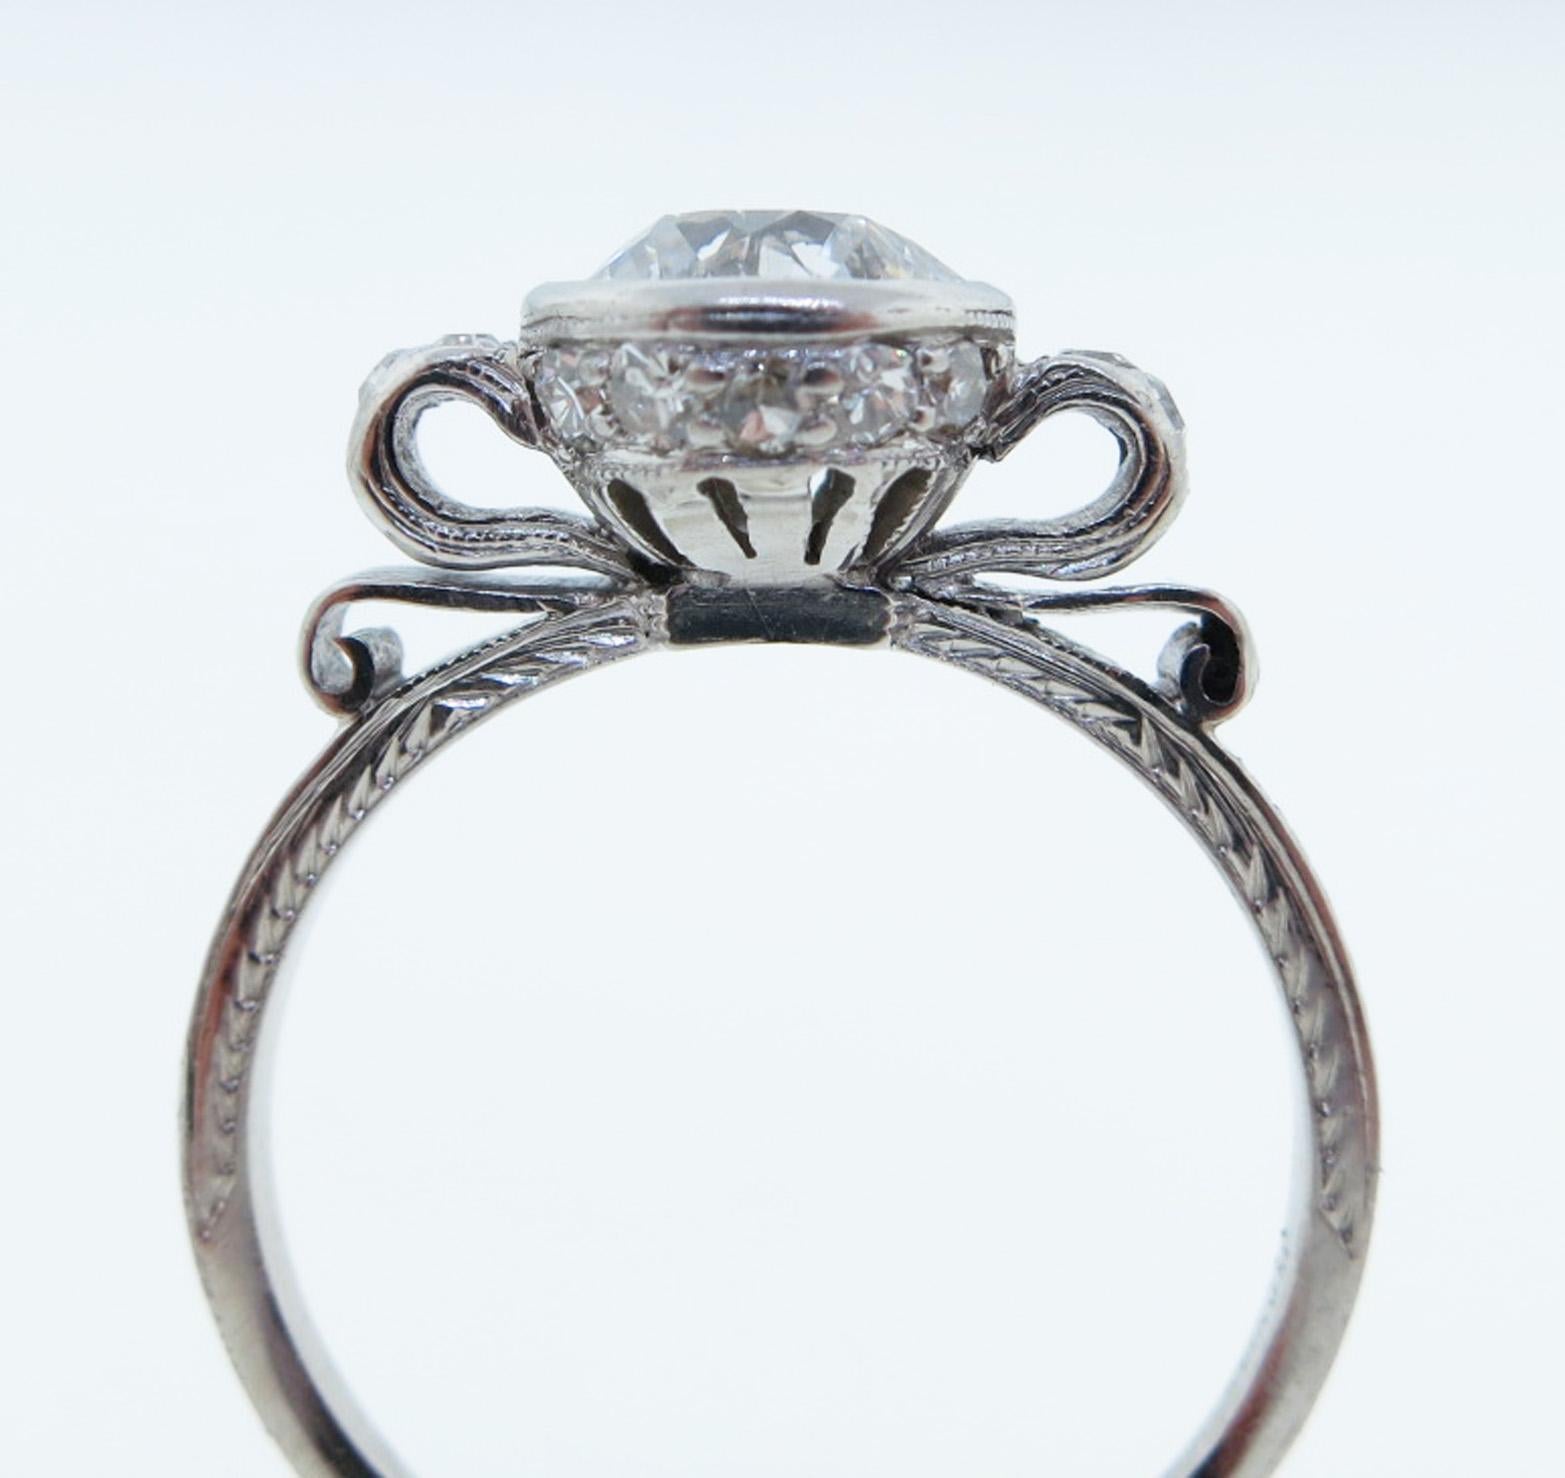 Handmade platinum mount diamond ring in a bow design mount. The center is bezel set with a round brilliant cut diamond weighing approx. 1.0 cts. grading SI1 clarity I-J color, the engraved mount is bead set 14 round diamonds totaling approx. .20cts.